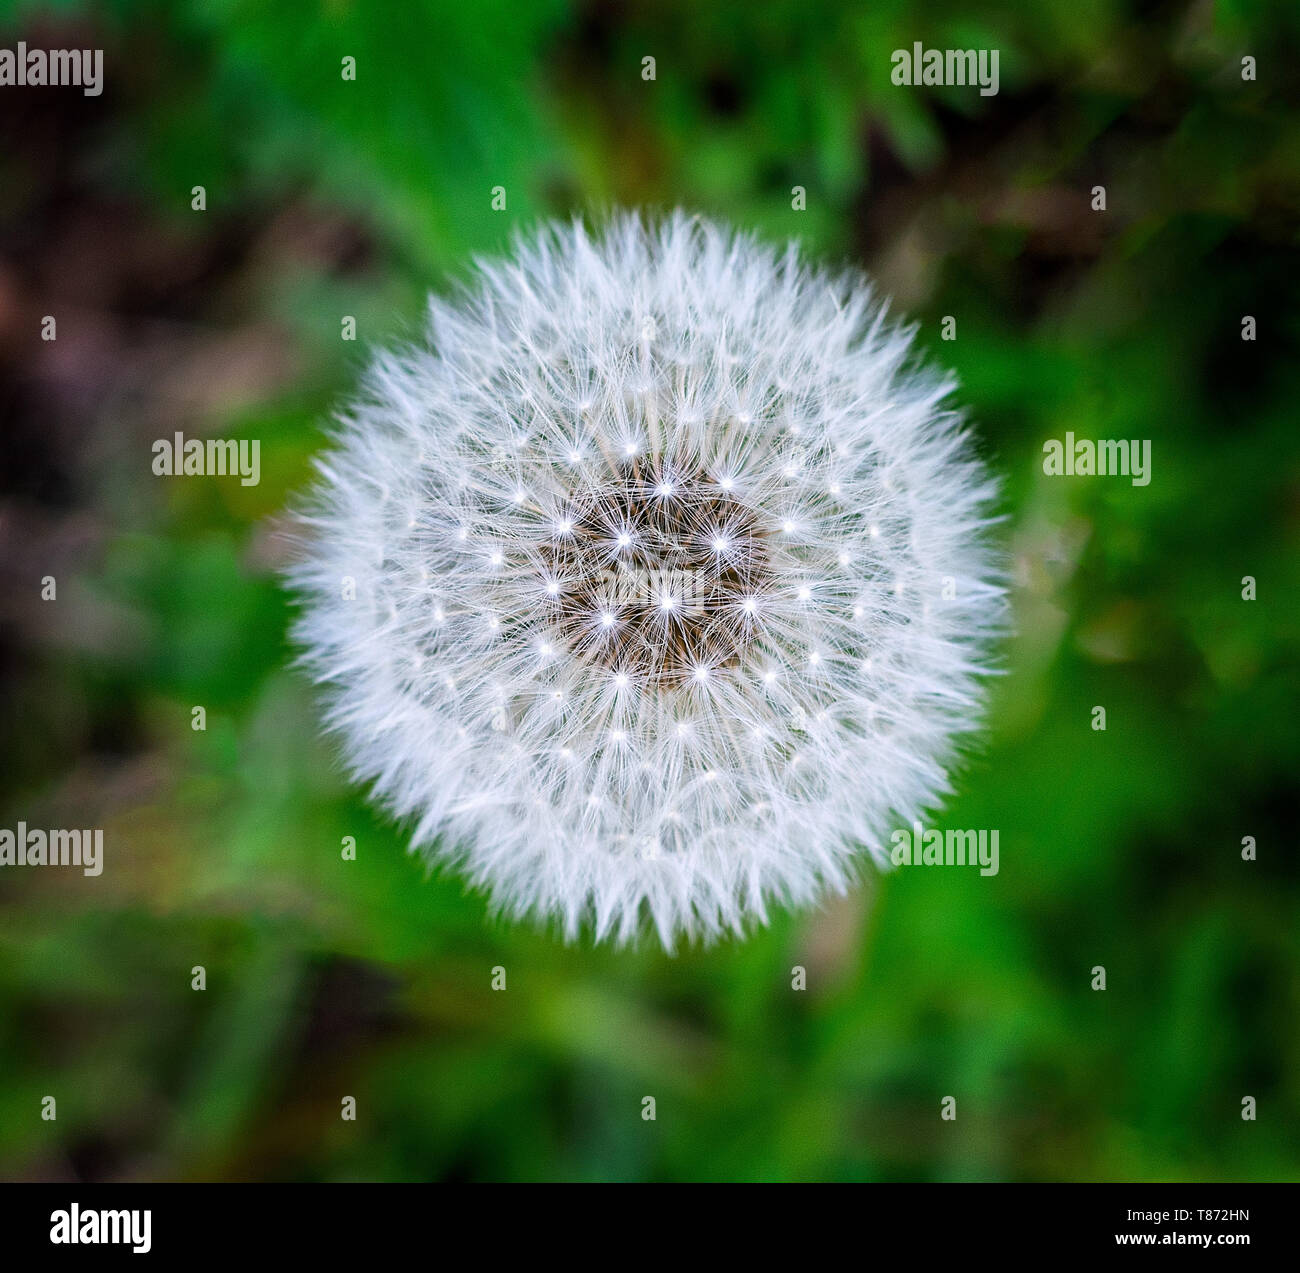 A dandelion seed head in its mature state before it's disturbed and blown away by the wind Stock Photo